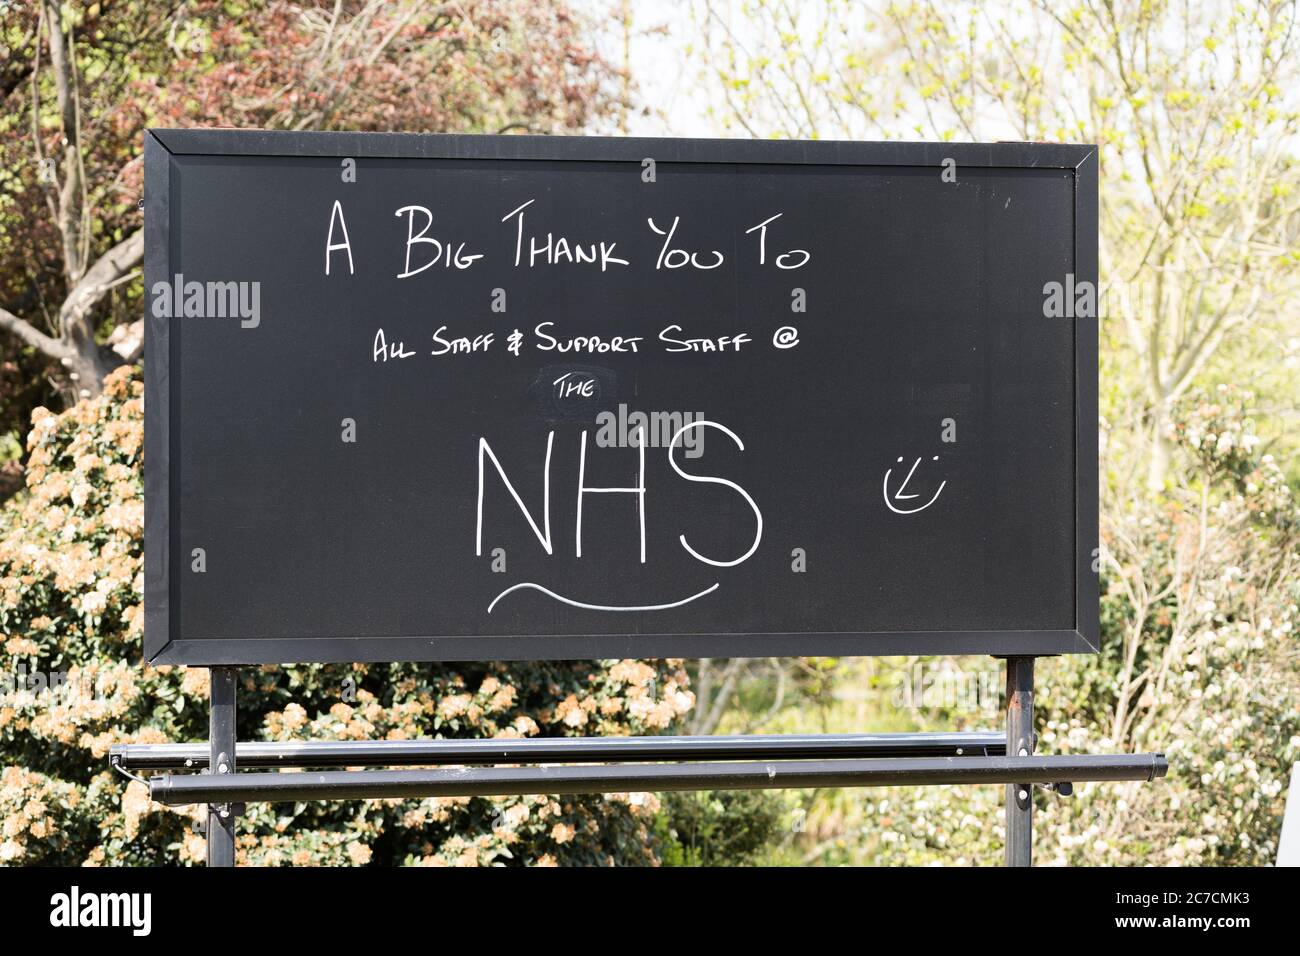 London, UK - April 12 2020: Beautiful black sign with white letters saying' A big thank you to NHS' during coronavirus lockdown Stock Photo